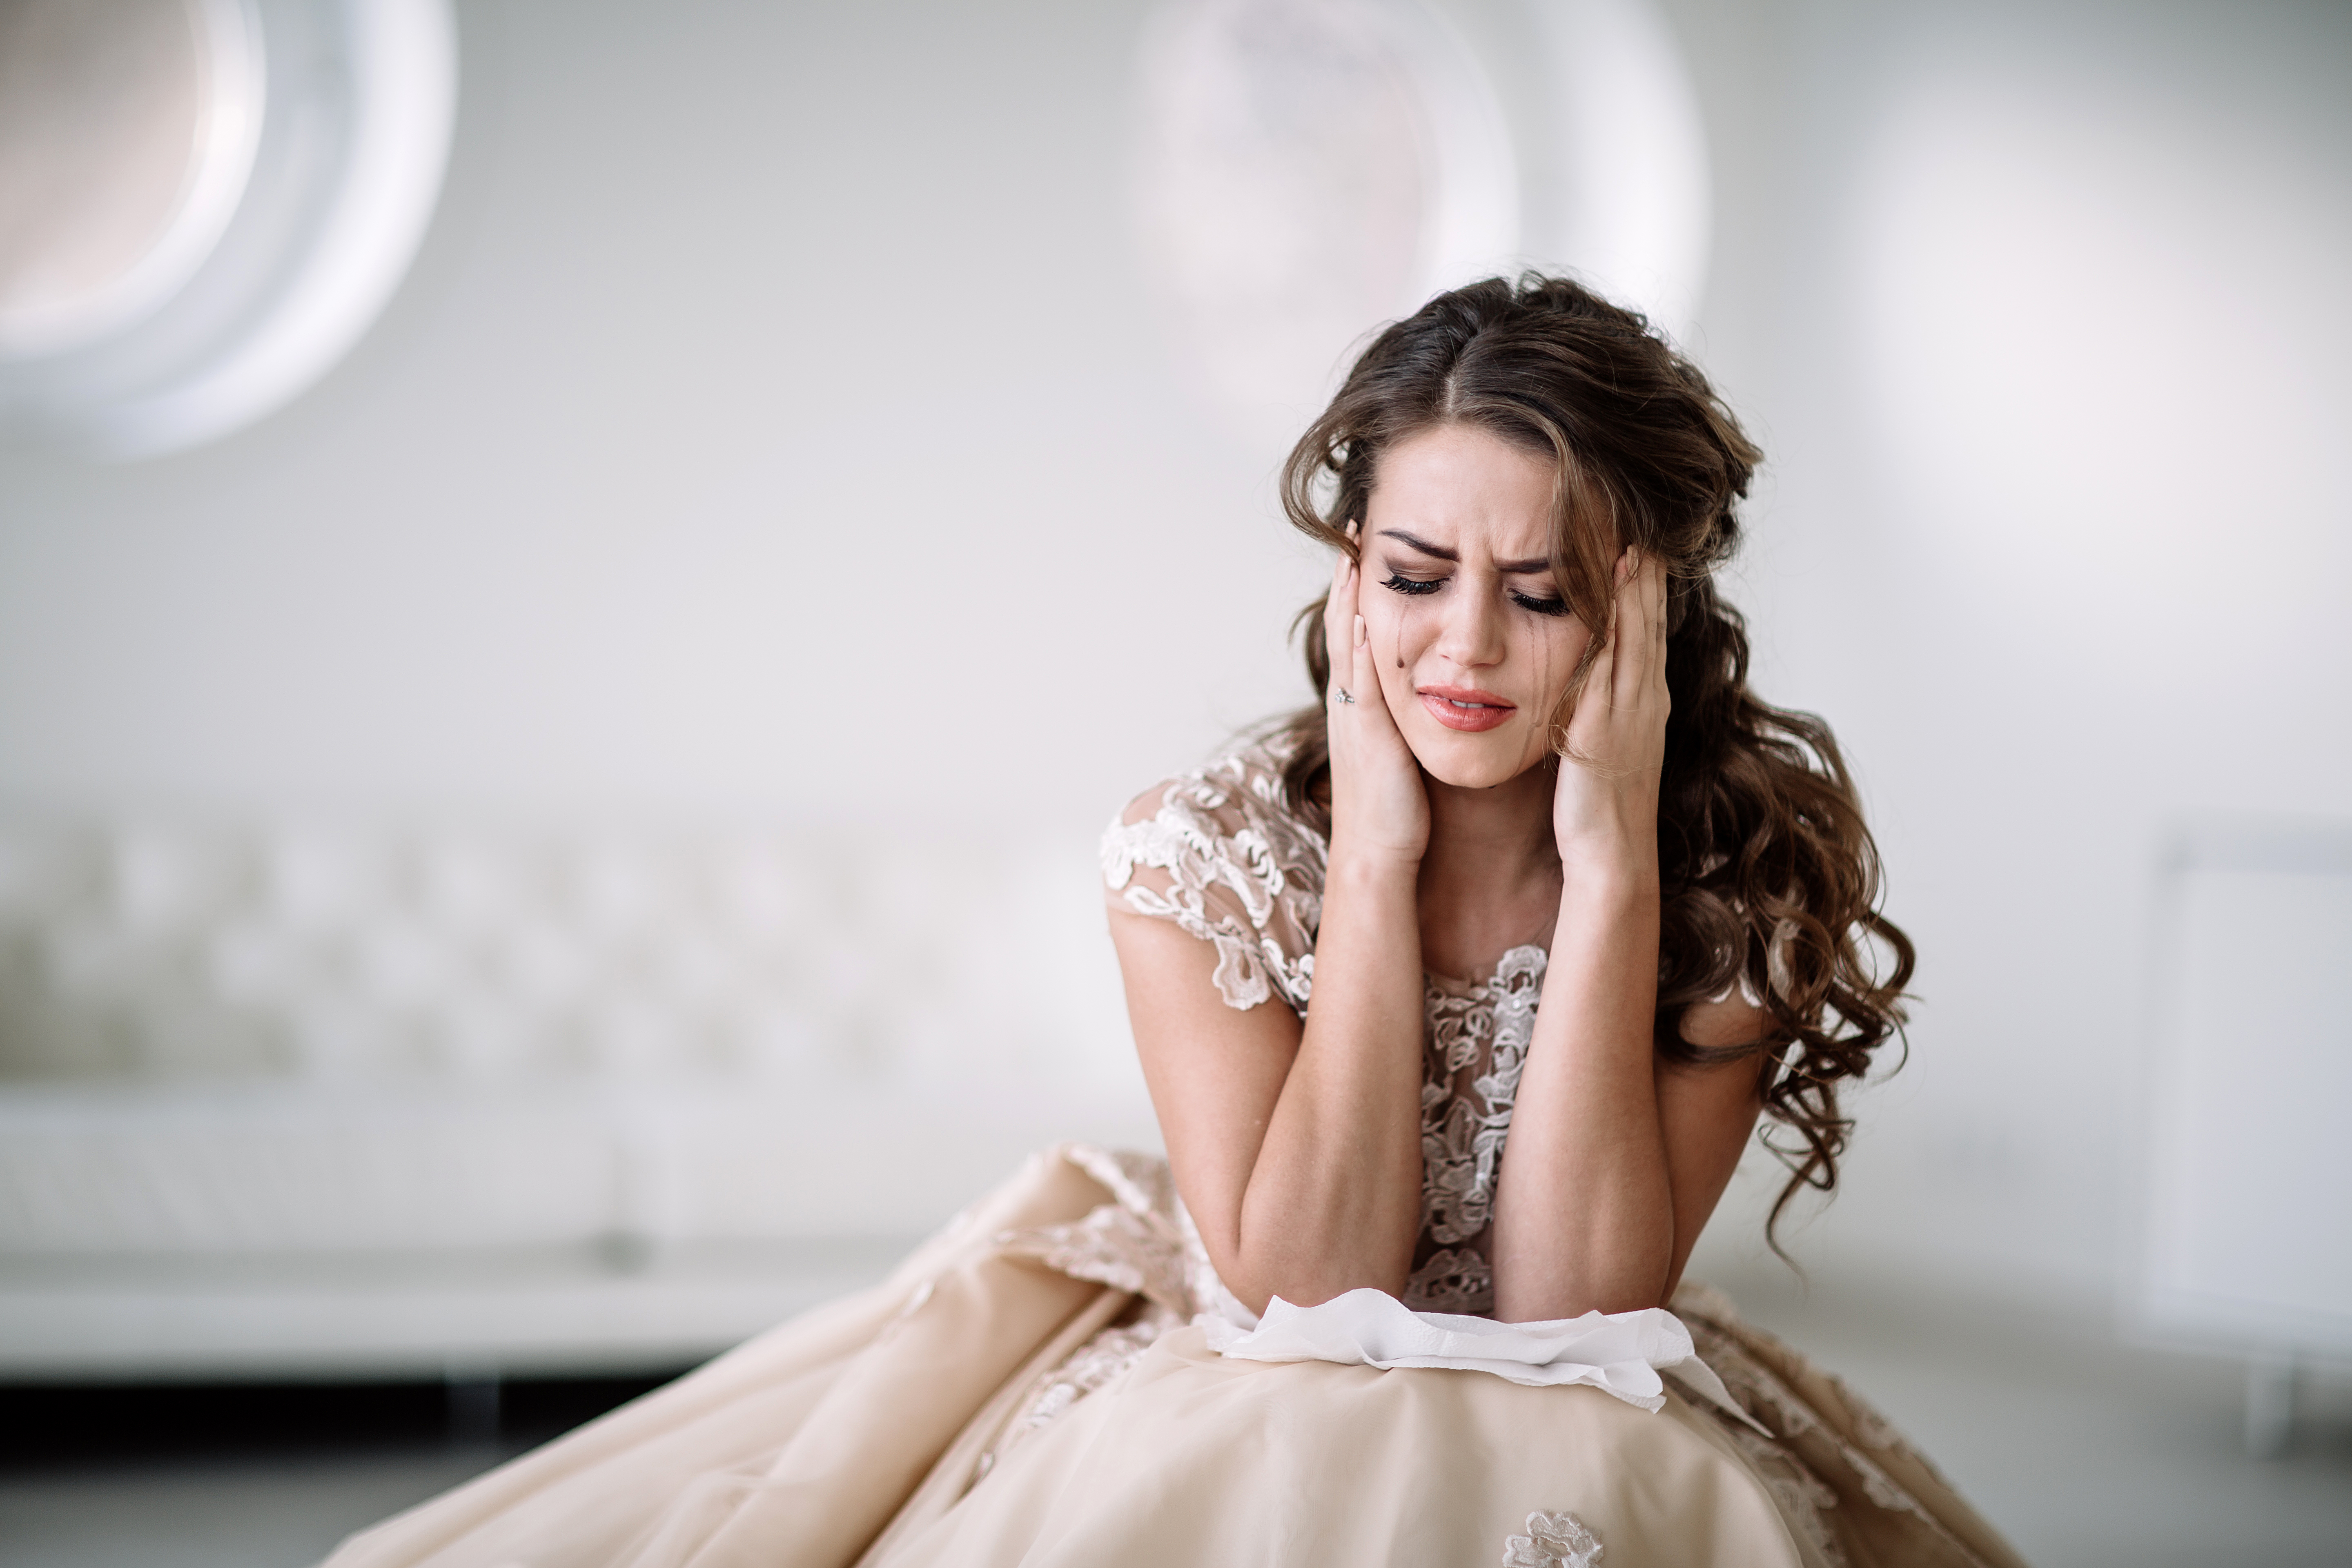 Bride crying | Source: Shutterstock.com